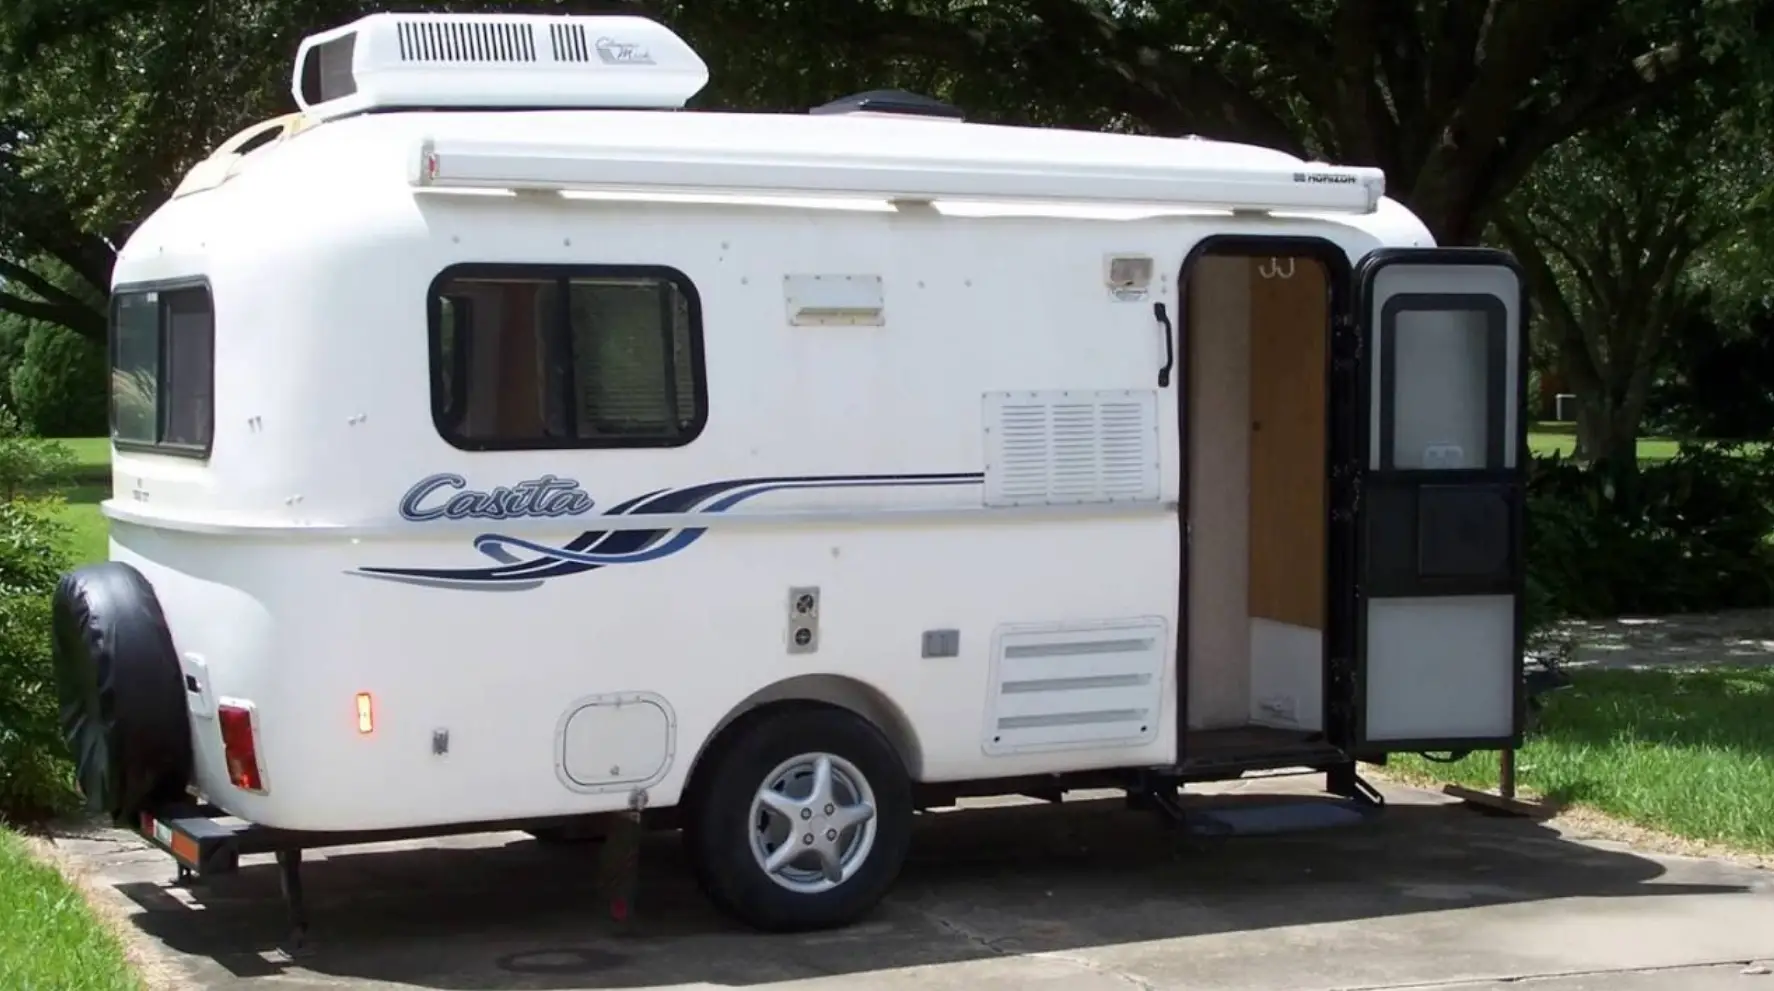 12 Best Small Travel Trailers with Bathrooms | MR RV Casita Travel Trailers Spirit Deluxe Small Travel Trailer